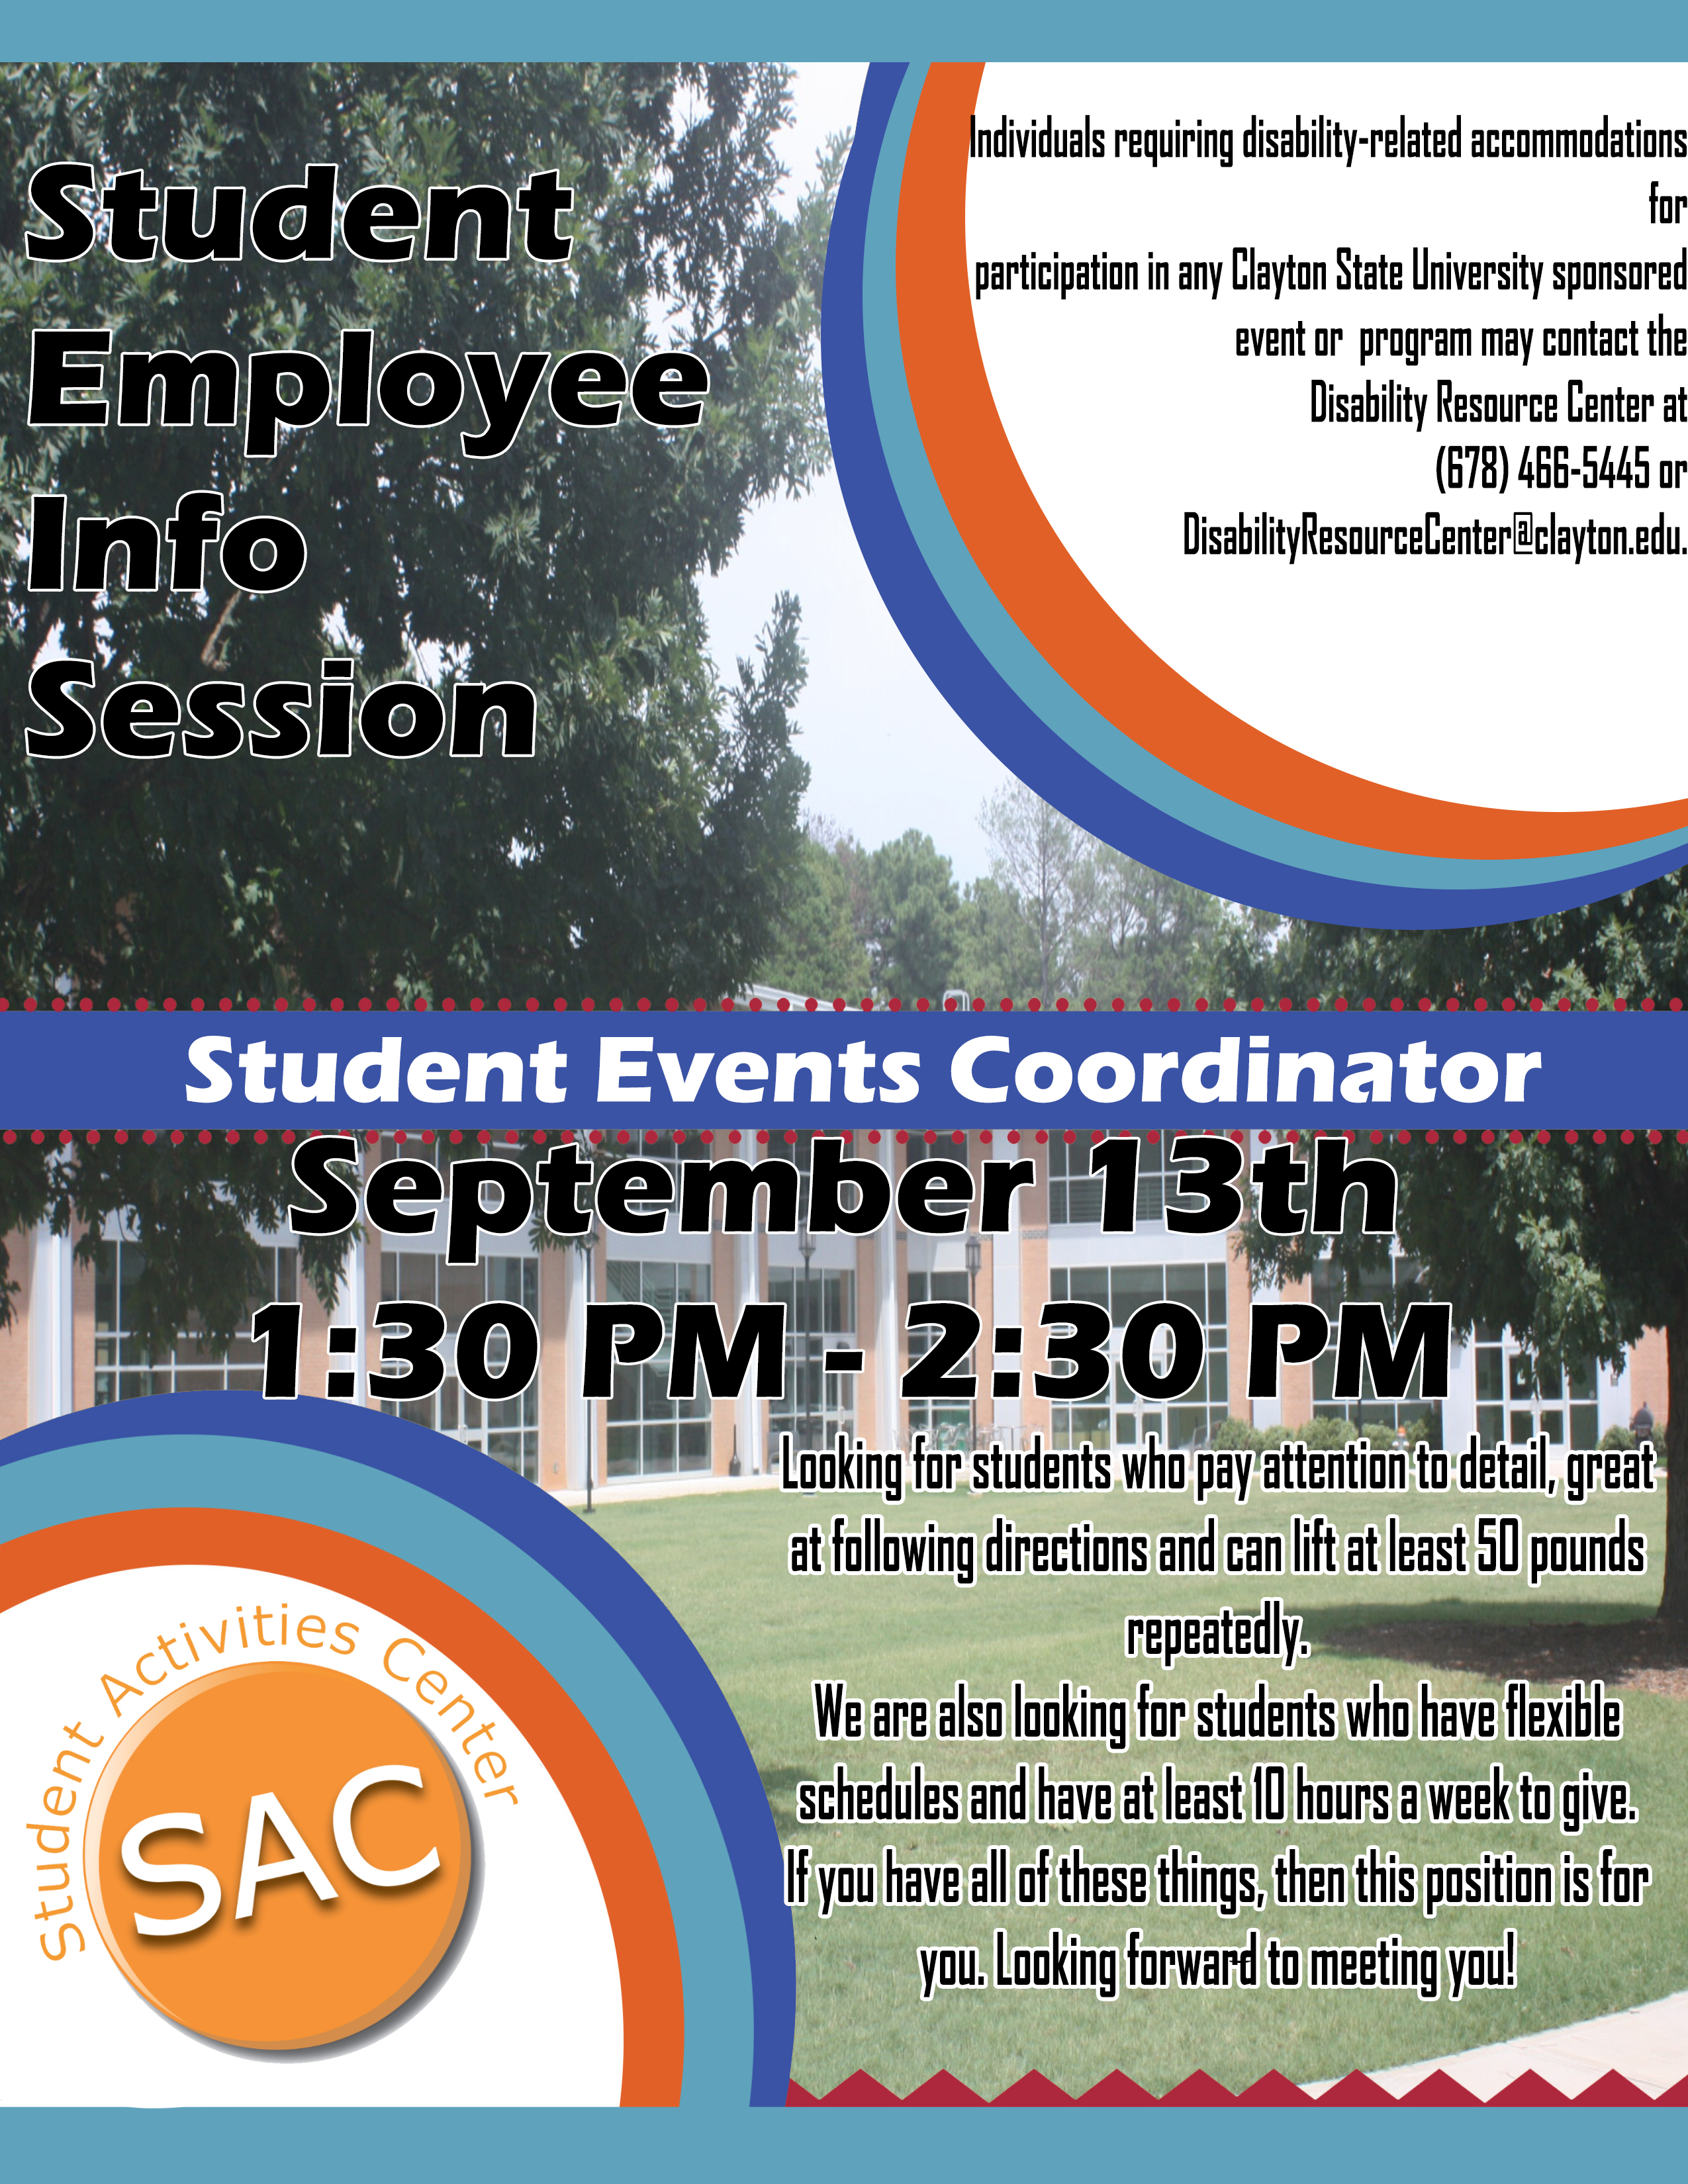 Flyer for the Student Activities Center's Student Coordinator Position